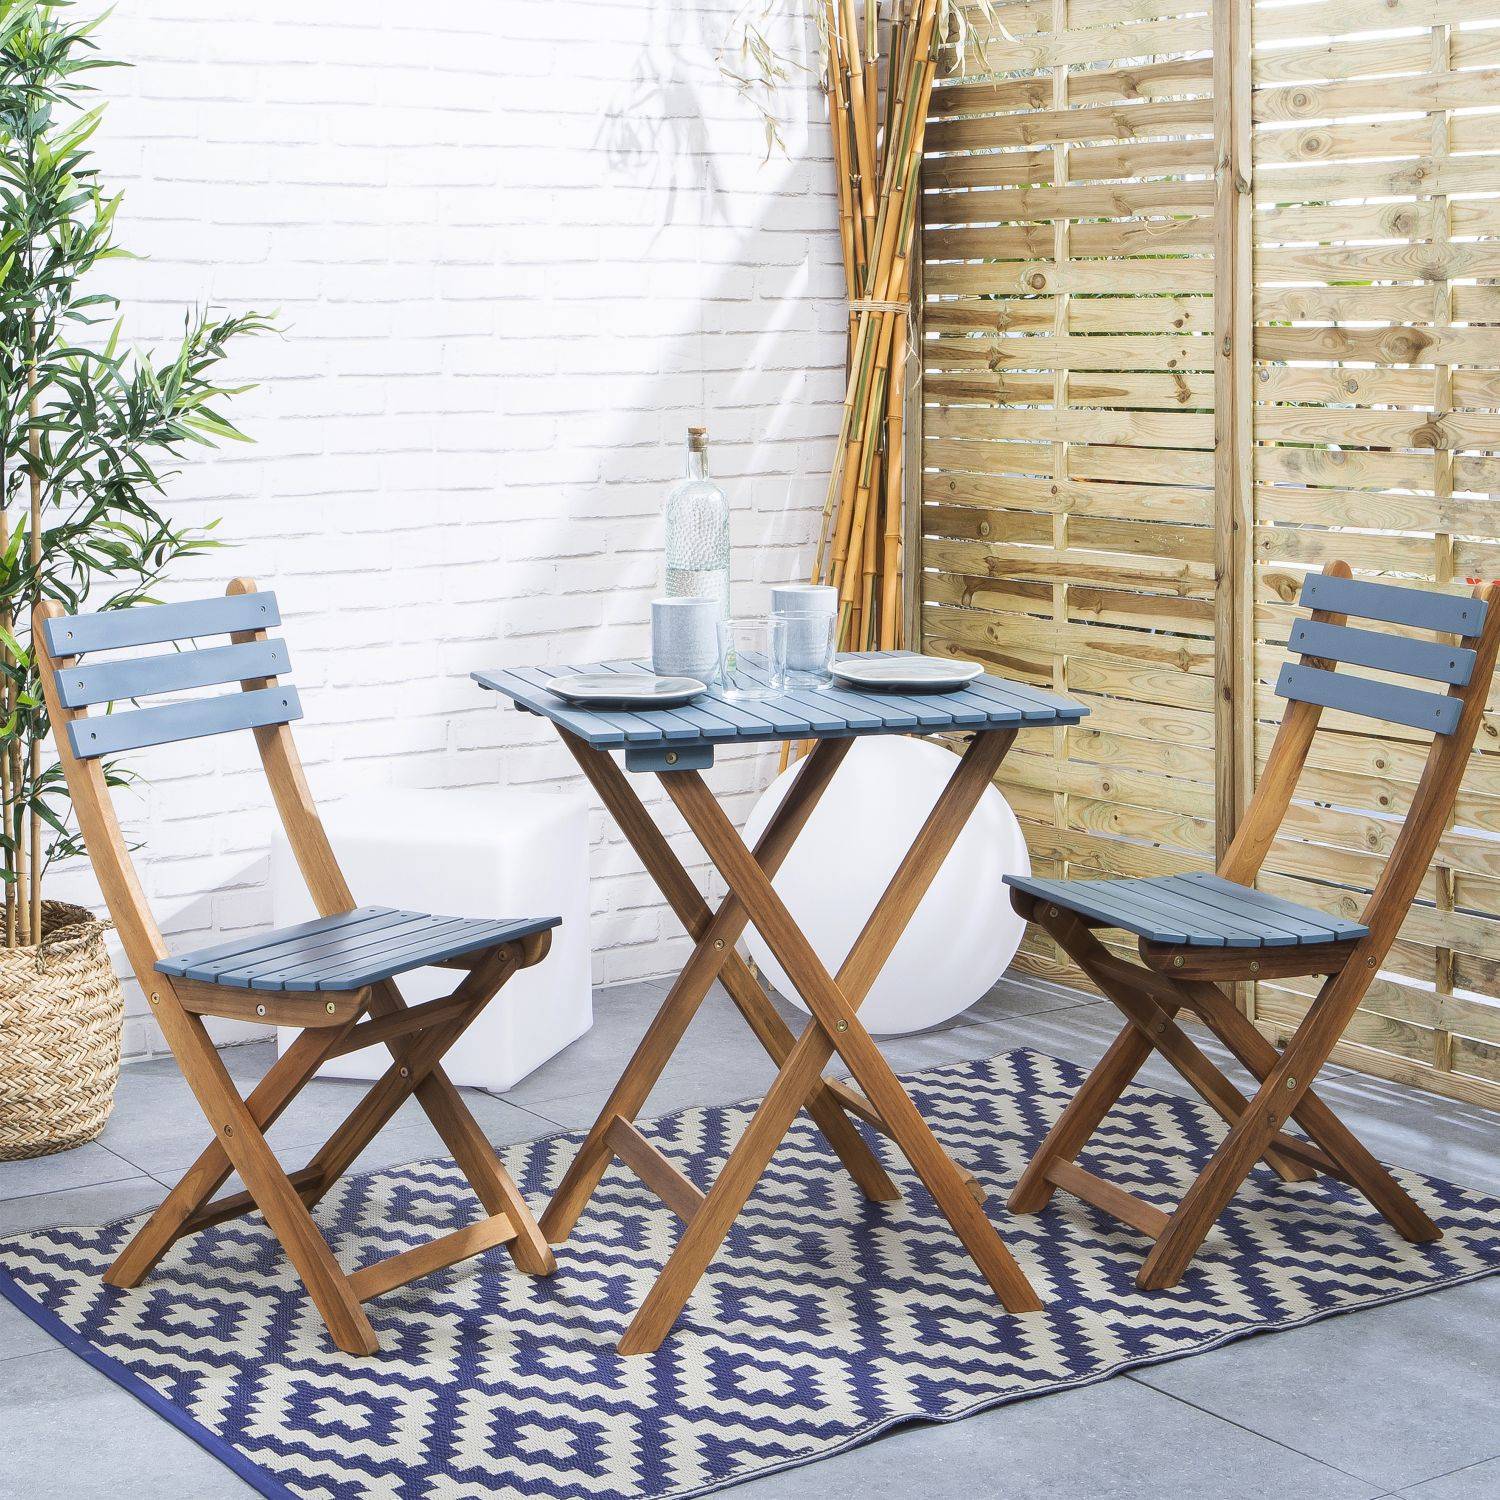 2-seater foldable wooden bistro garden table with chairs, 60x60cm - Barcelona - Grey Blue,sweeek,Photo1